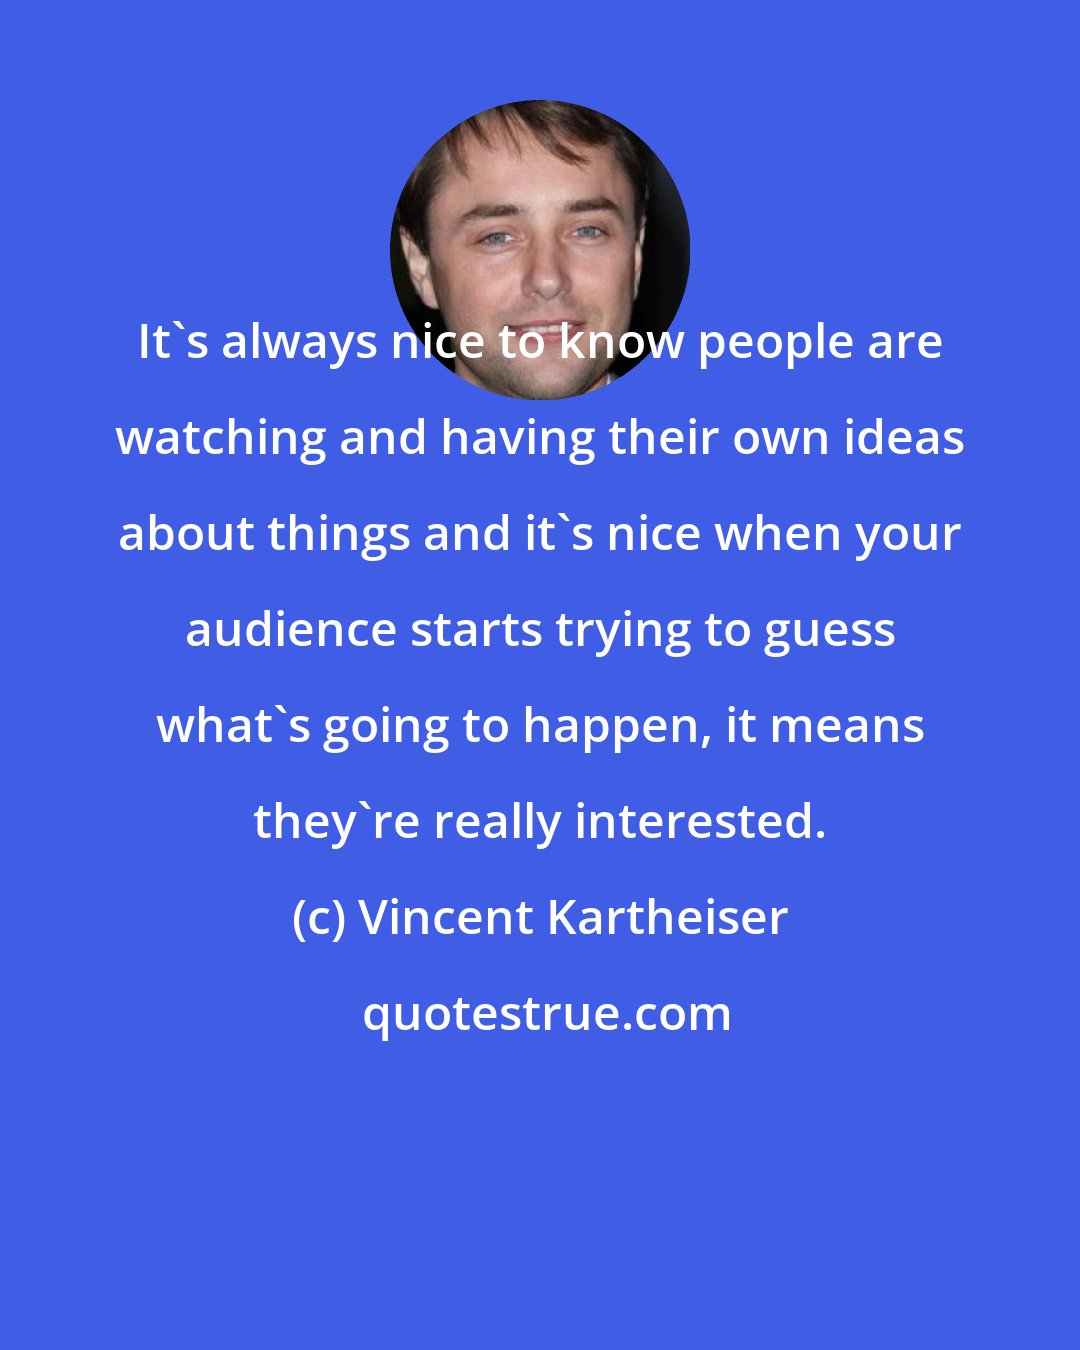 Vincent Kartheiser: It's always nice to know people are watching and having their own ideas about things and it's nice when your audience starts trying to guess what's going to happen, it means they're really interested.